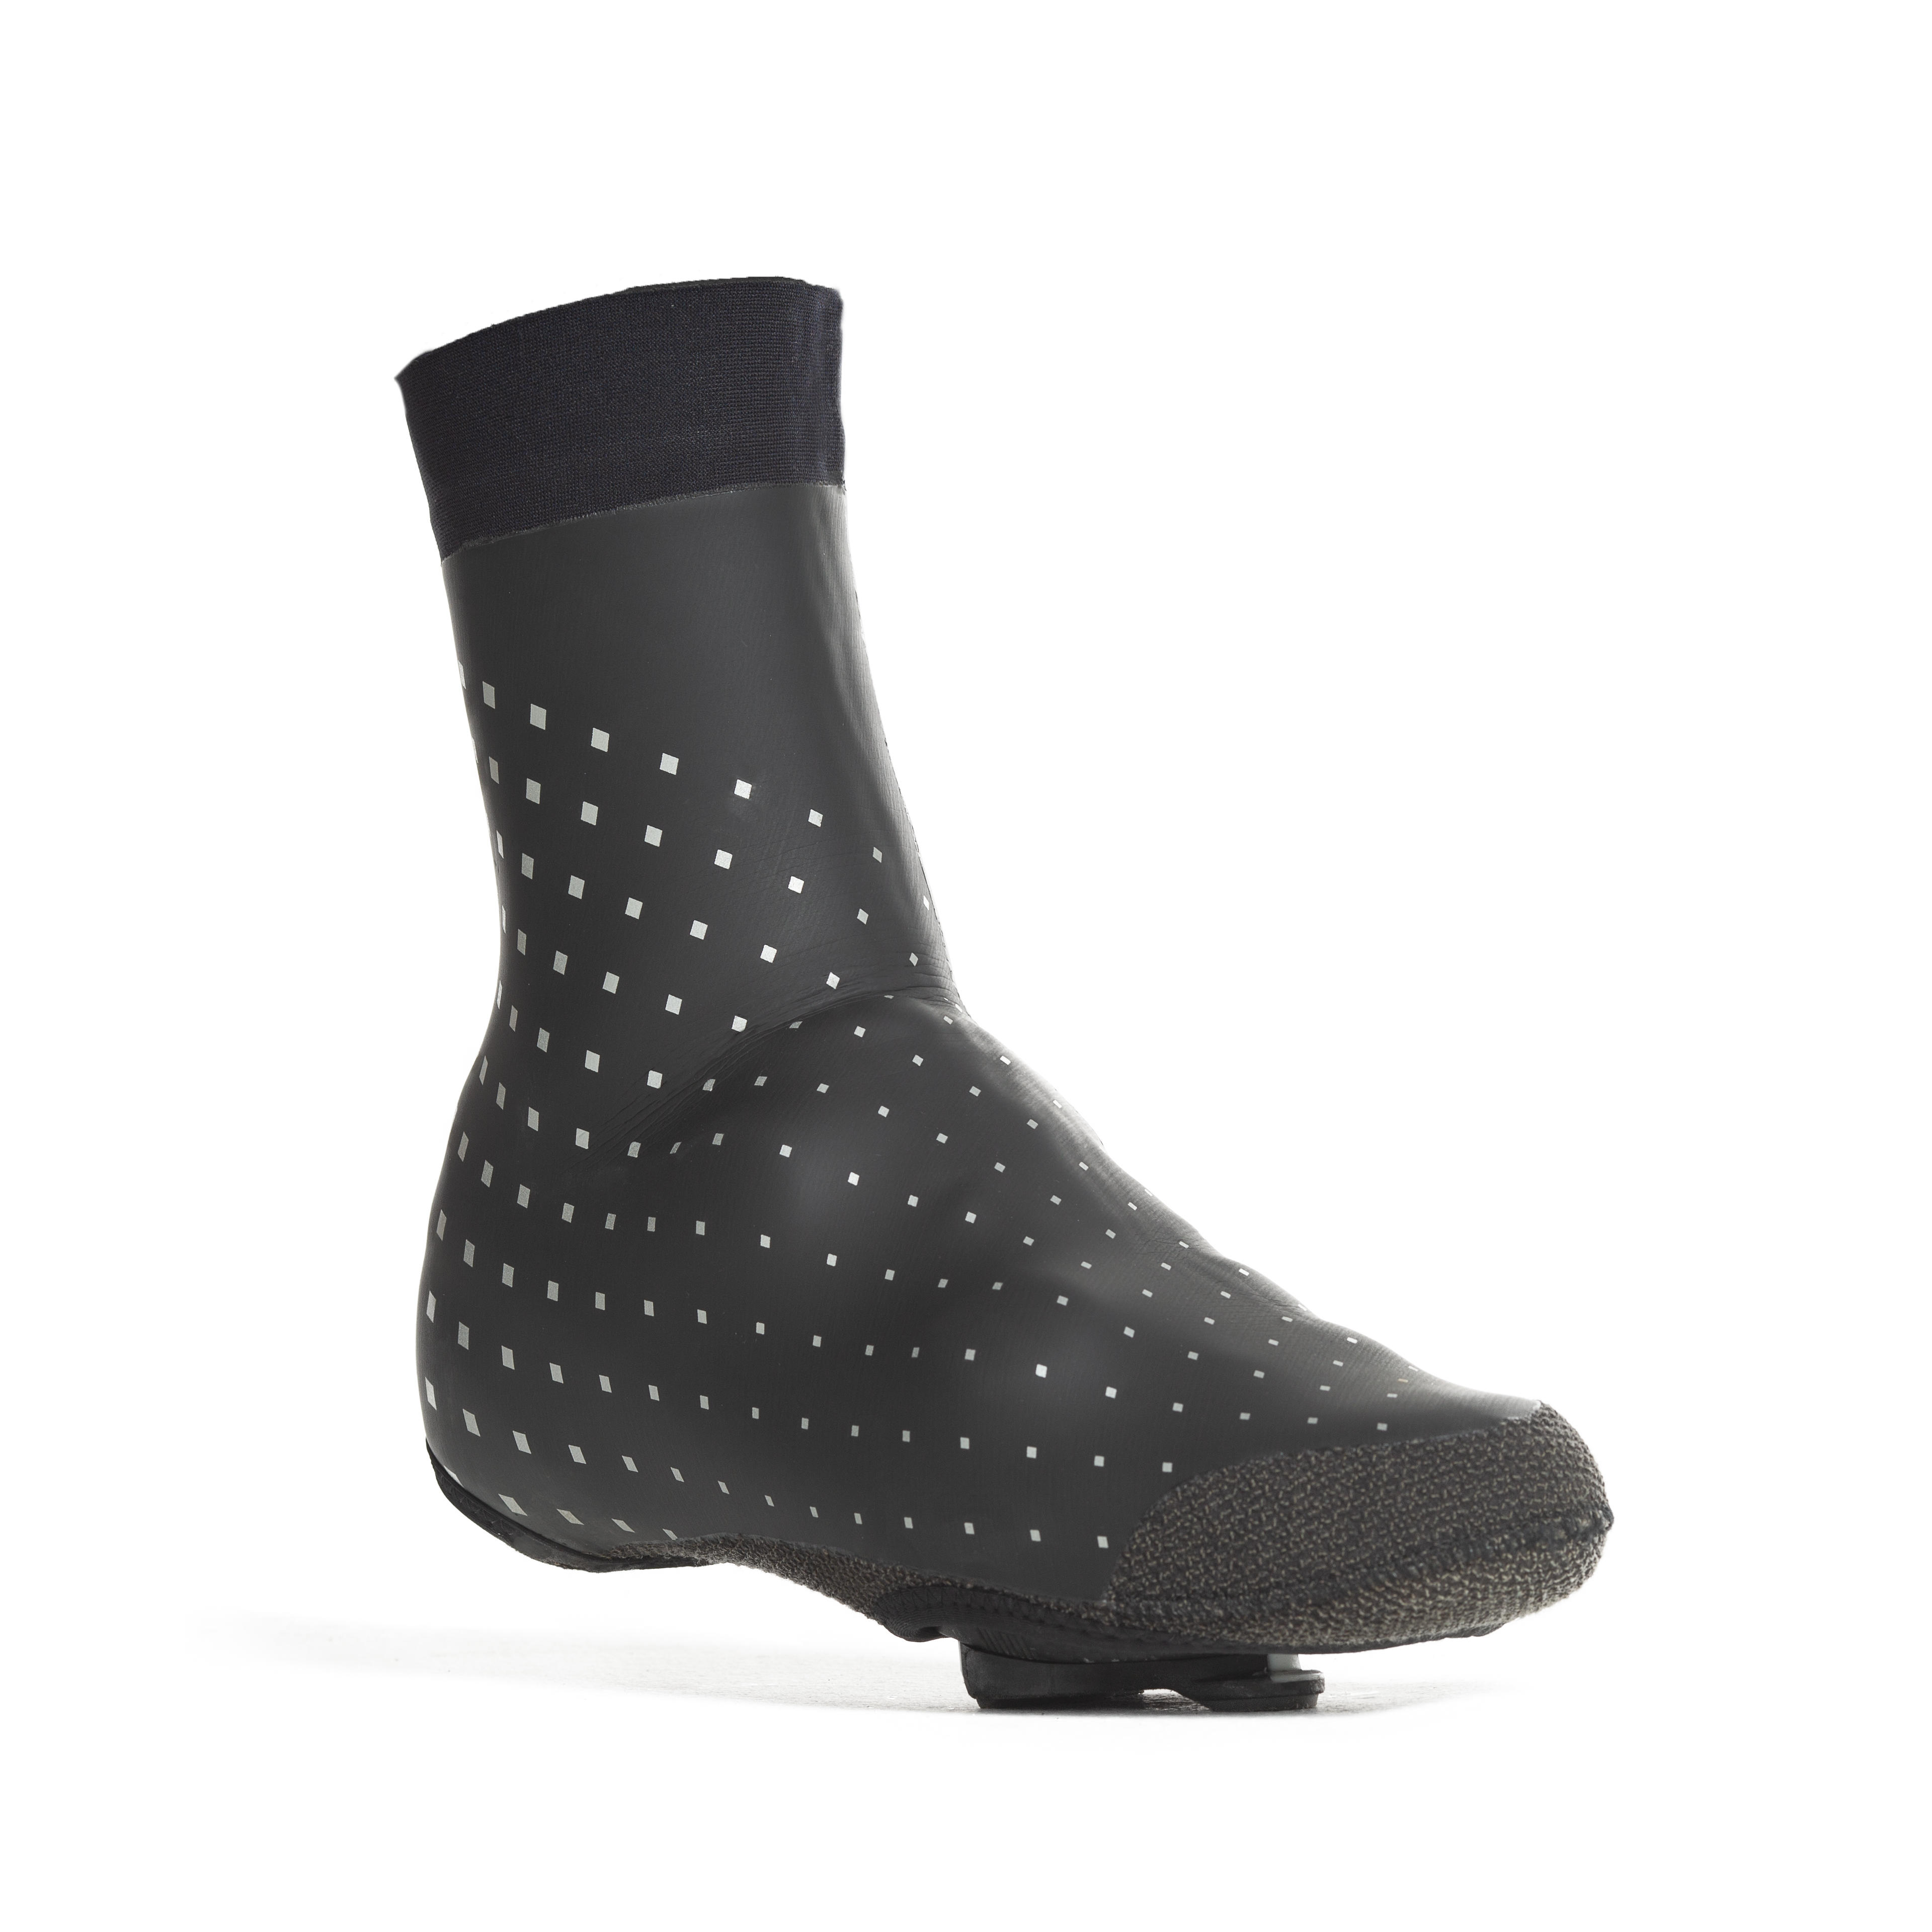 RR 900 5mm Cycling Overshoes - Black 